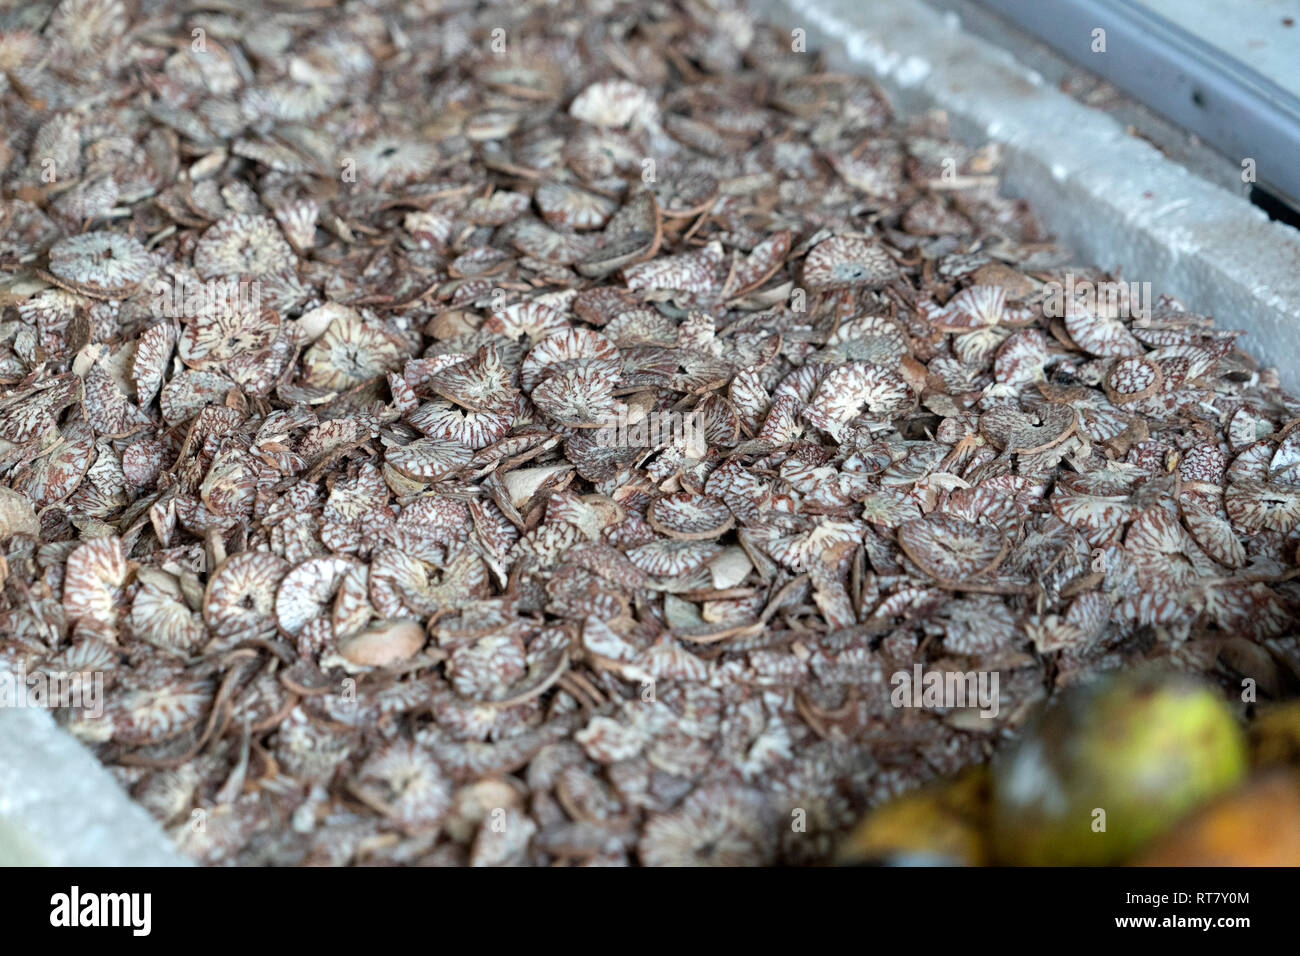 Betel cutted seed qat preparation Stock Photo